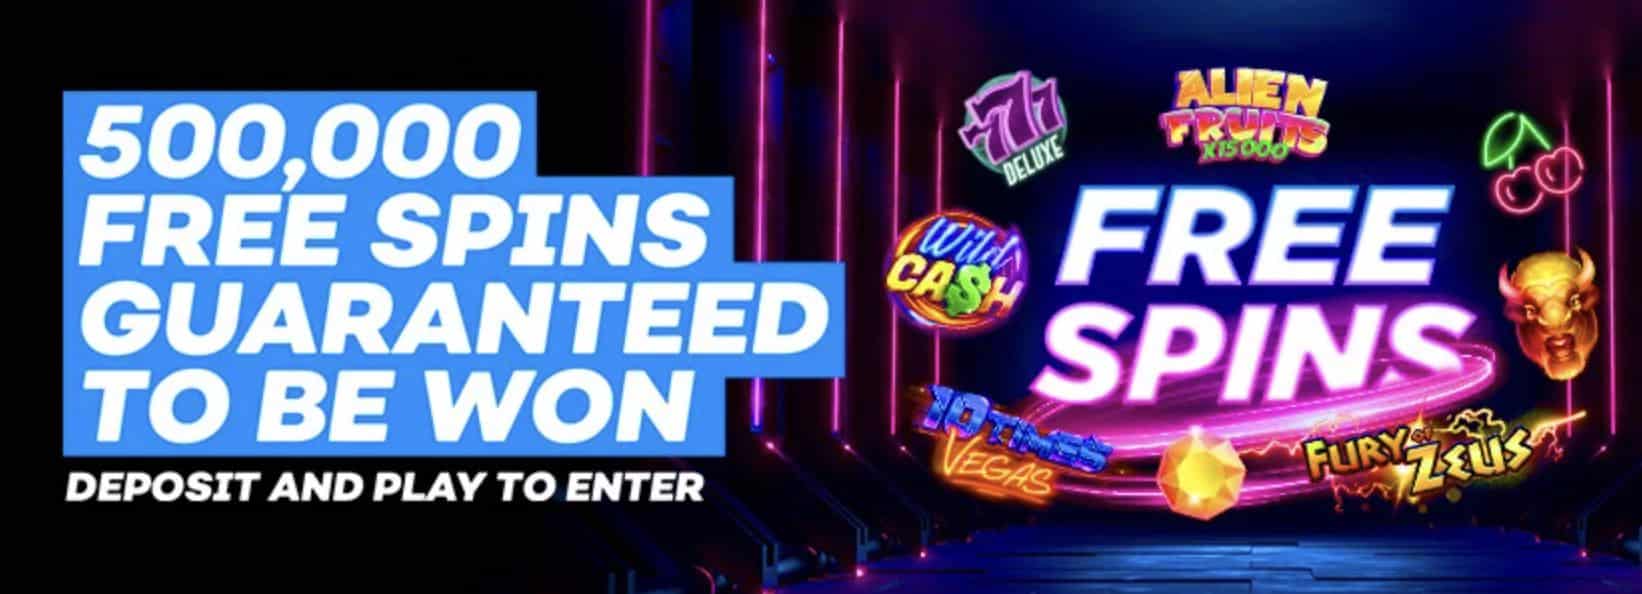 A screenshot of the free spins banner ad at the Bovada betting site